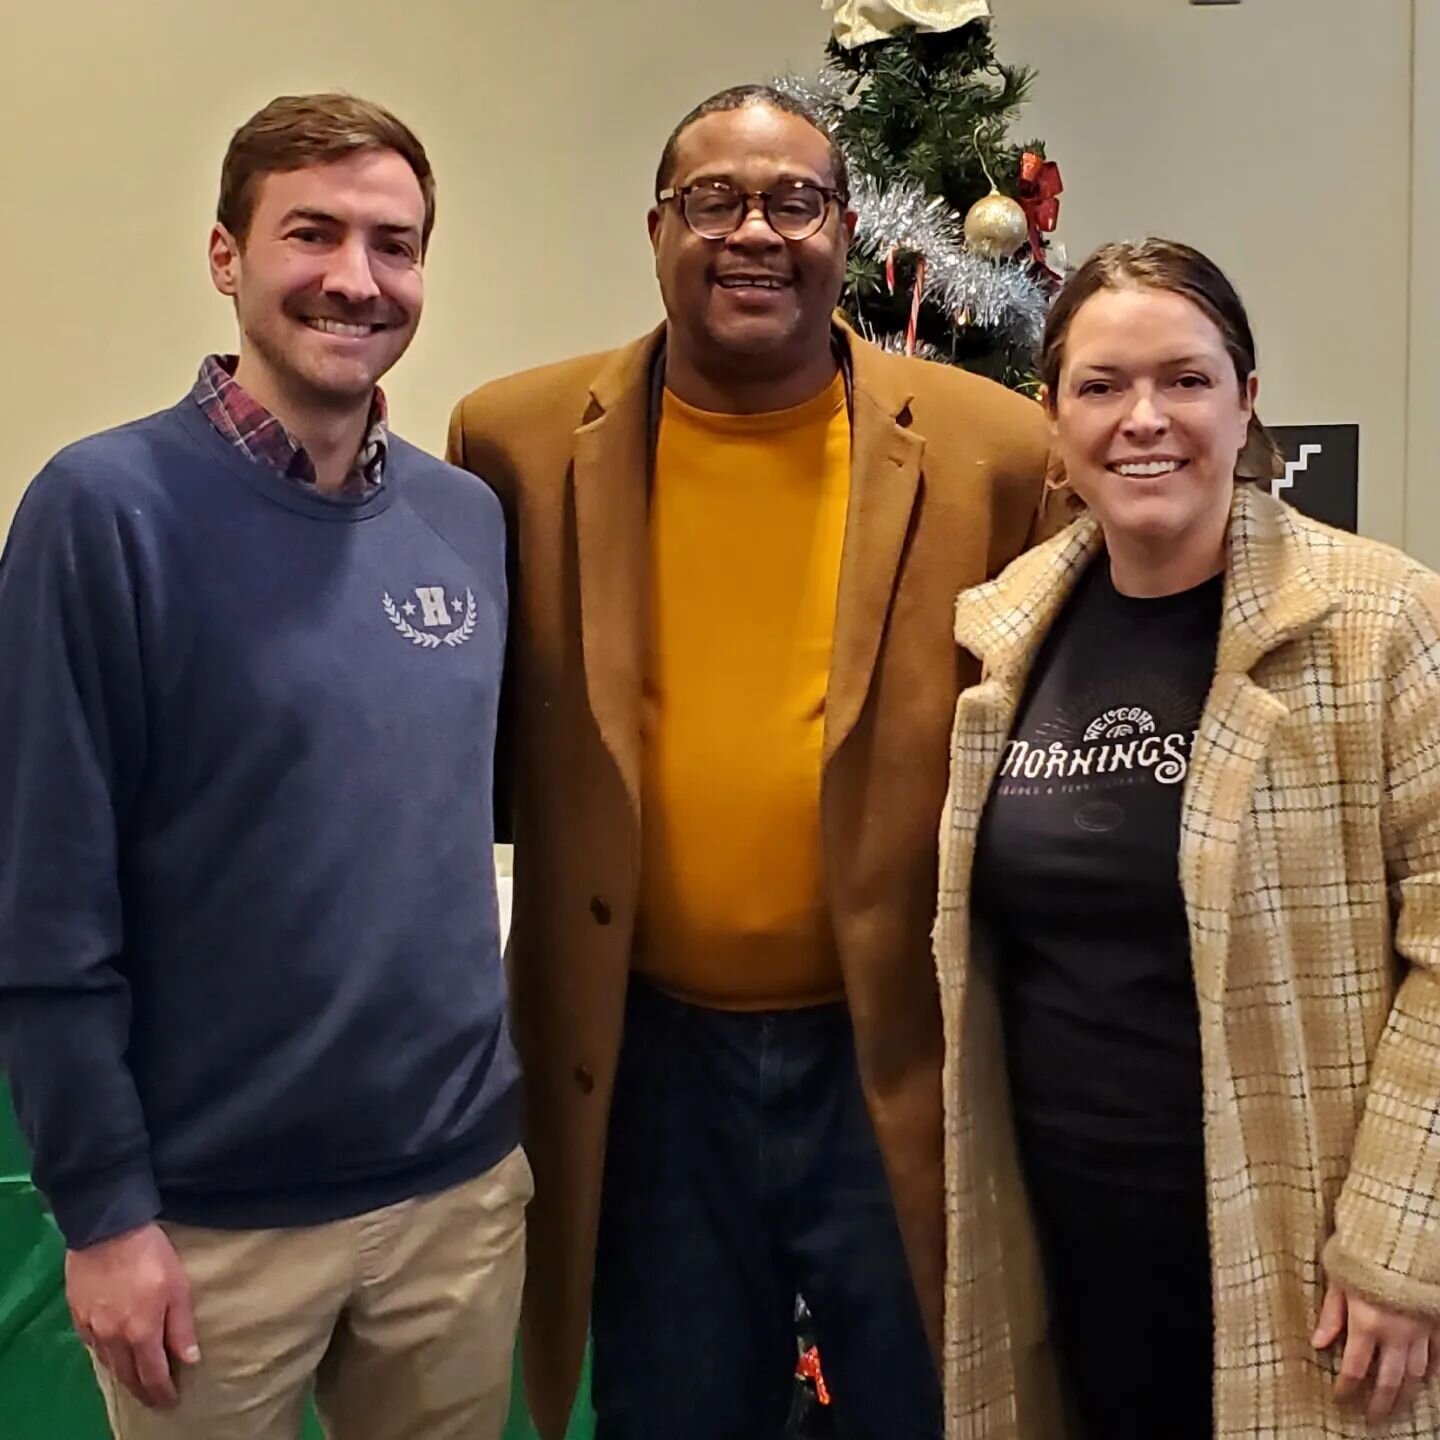 Thank you Mayor Gainey for stopping by our event tonight. 

Left to right:
Mark Silvester, MACC Vice President
Mayor Ed Gainey
Alana Rykala Delaney, MACC President